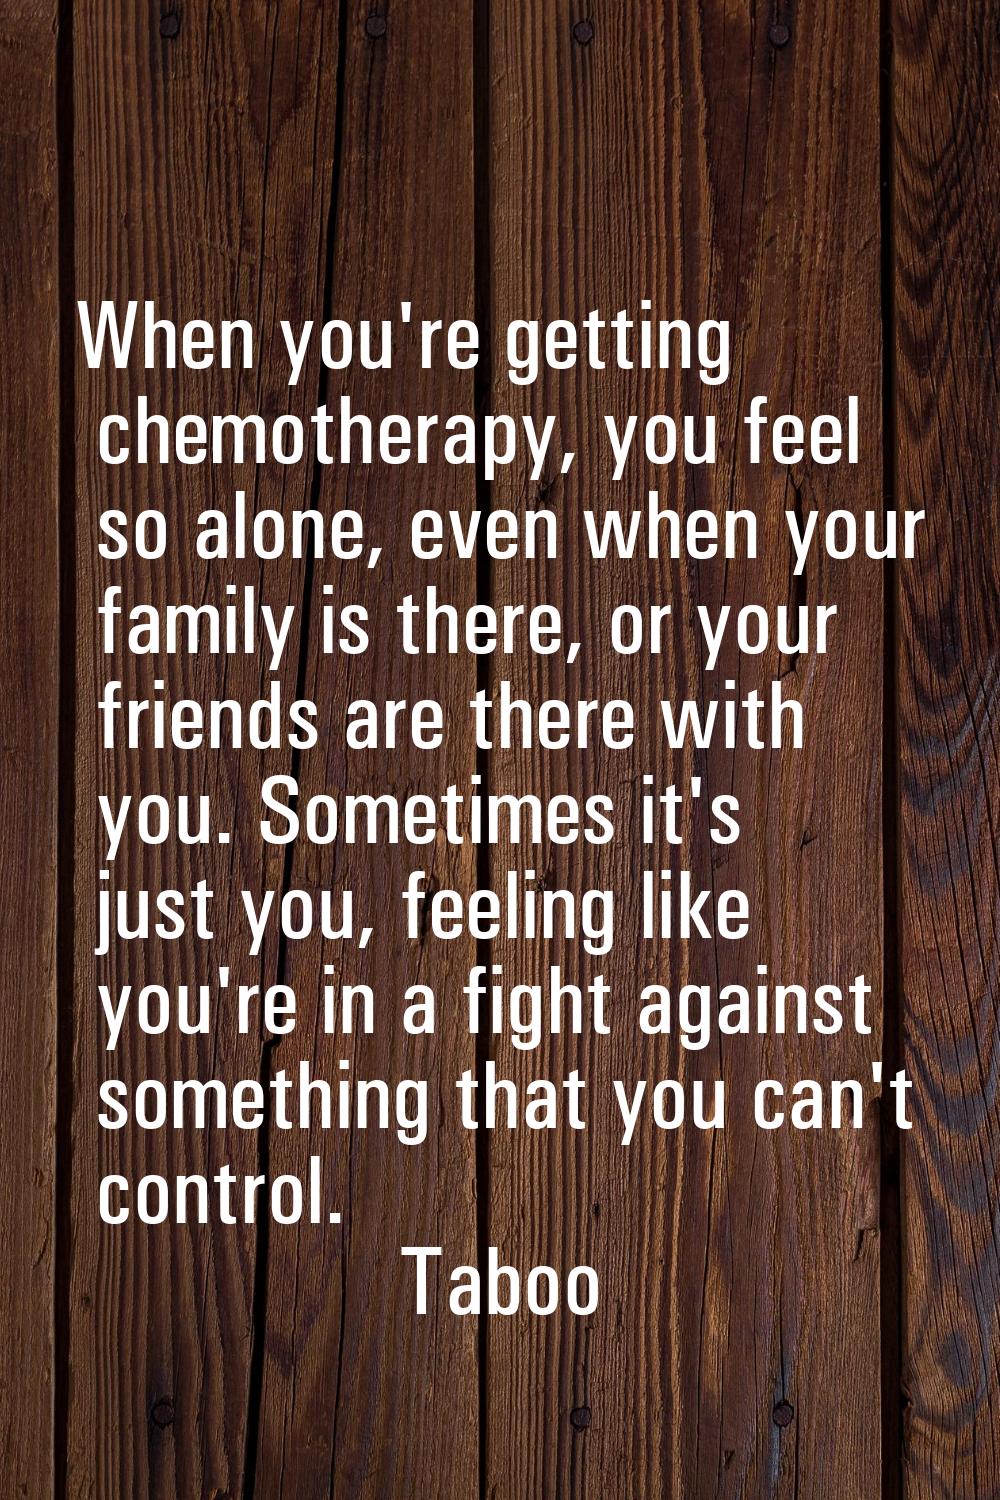 When you're getting chemotherapy, you feel so alone, even when your family is there, or your friend